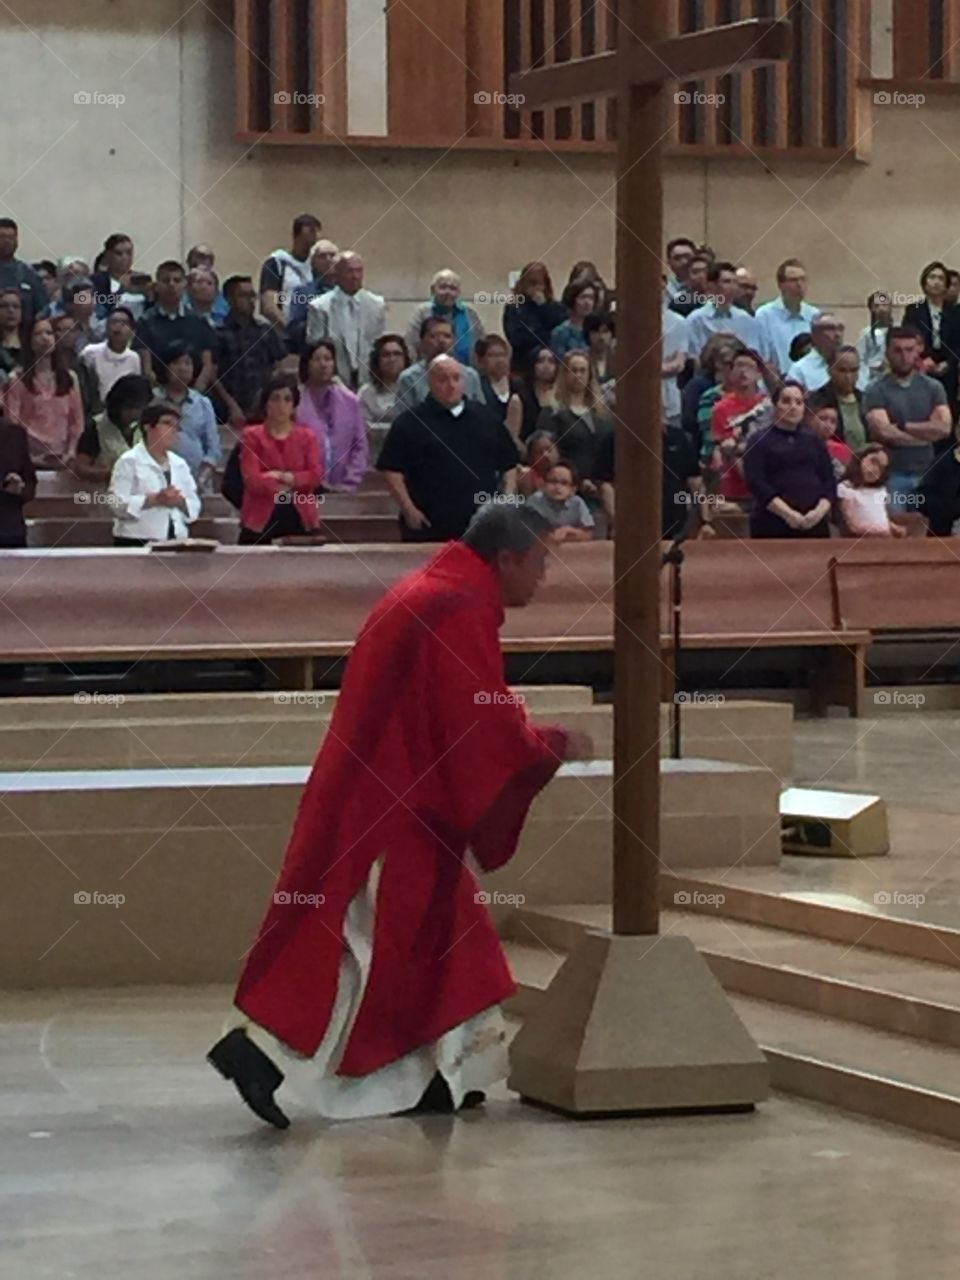 Good Friday service at the Cathedral of Our Lady of the Angeles, Los Angeles, CA